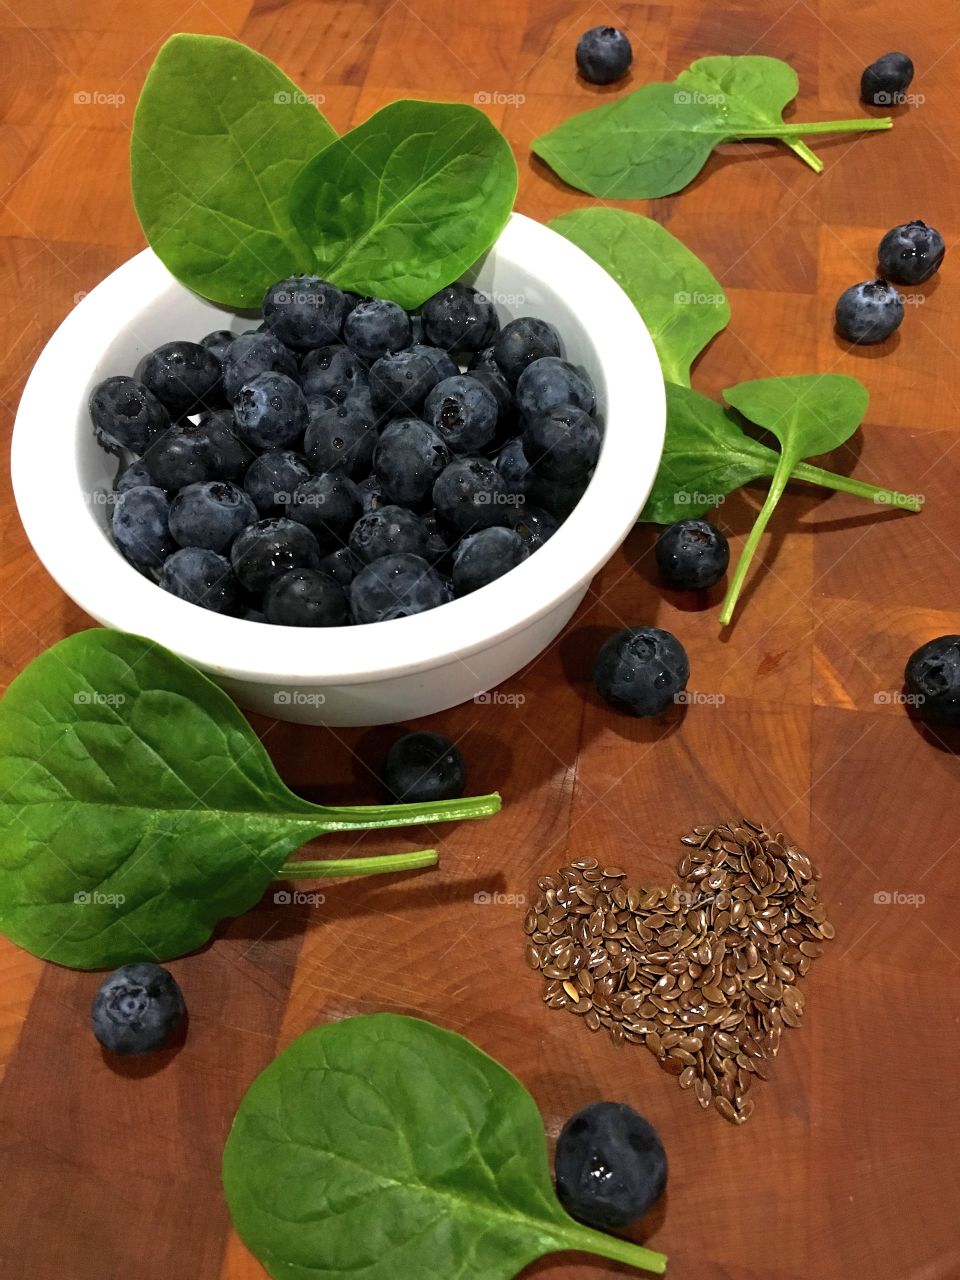 Flax seed in heart shape, with blueberries and spinach leaf